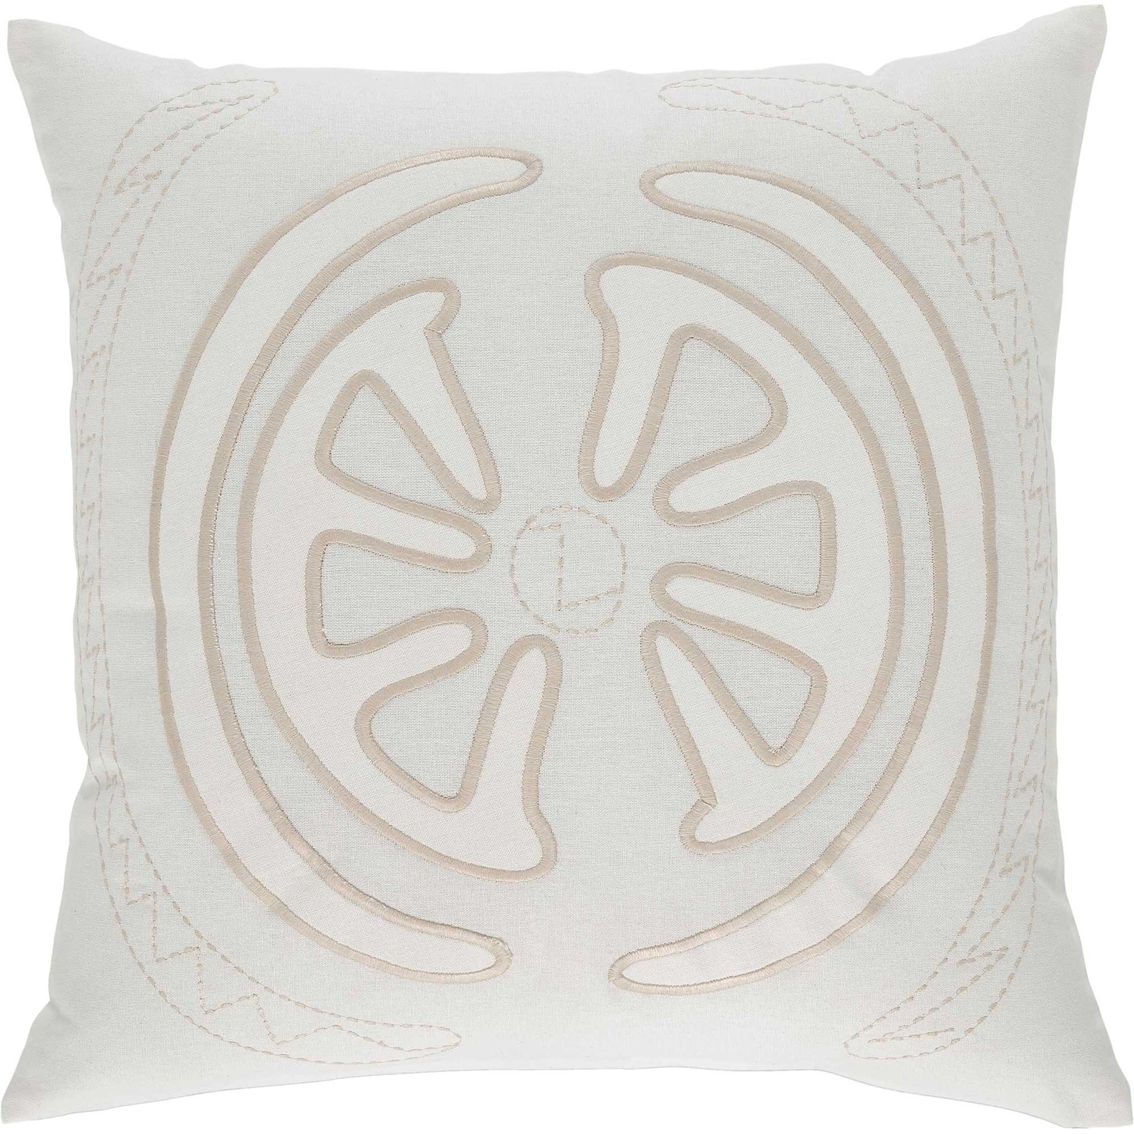 Southern Tide Point Reyes Square Decorative Pillow